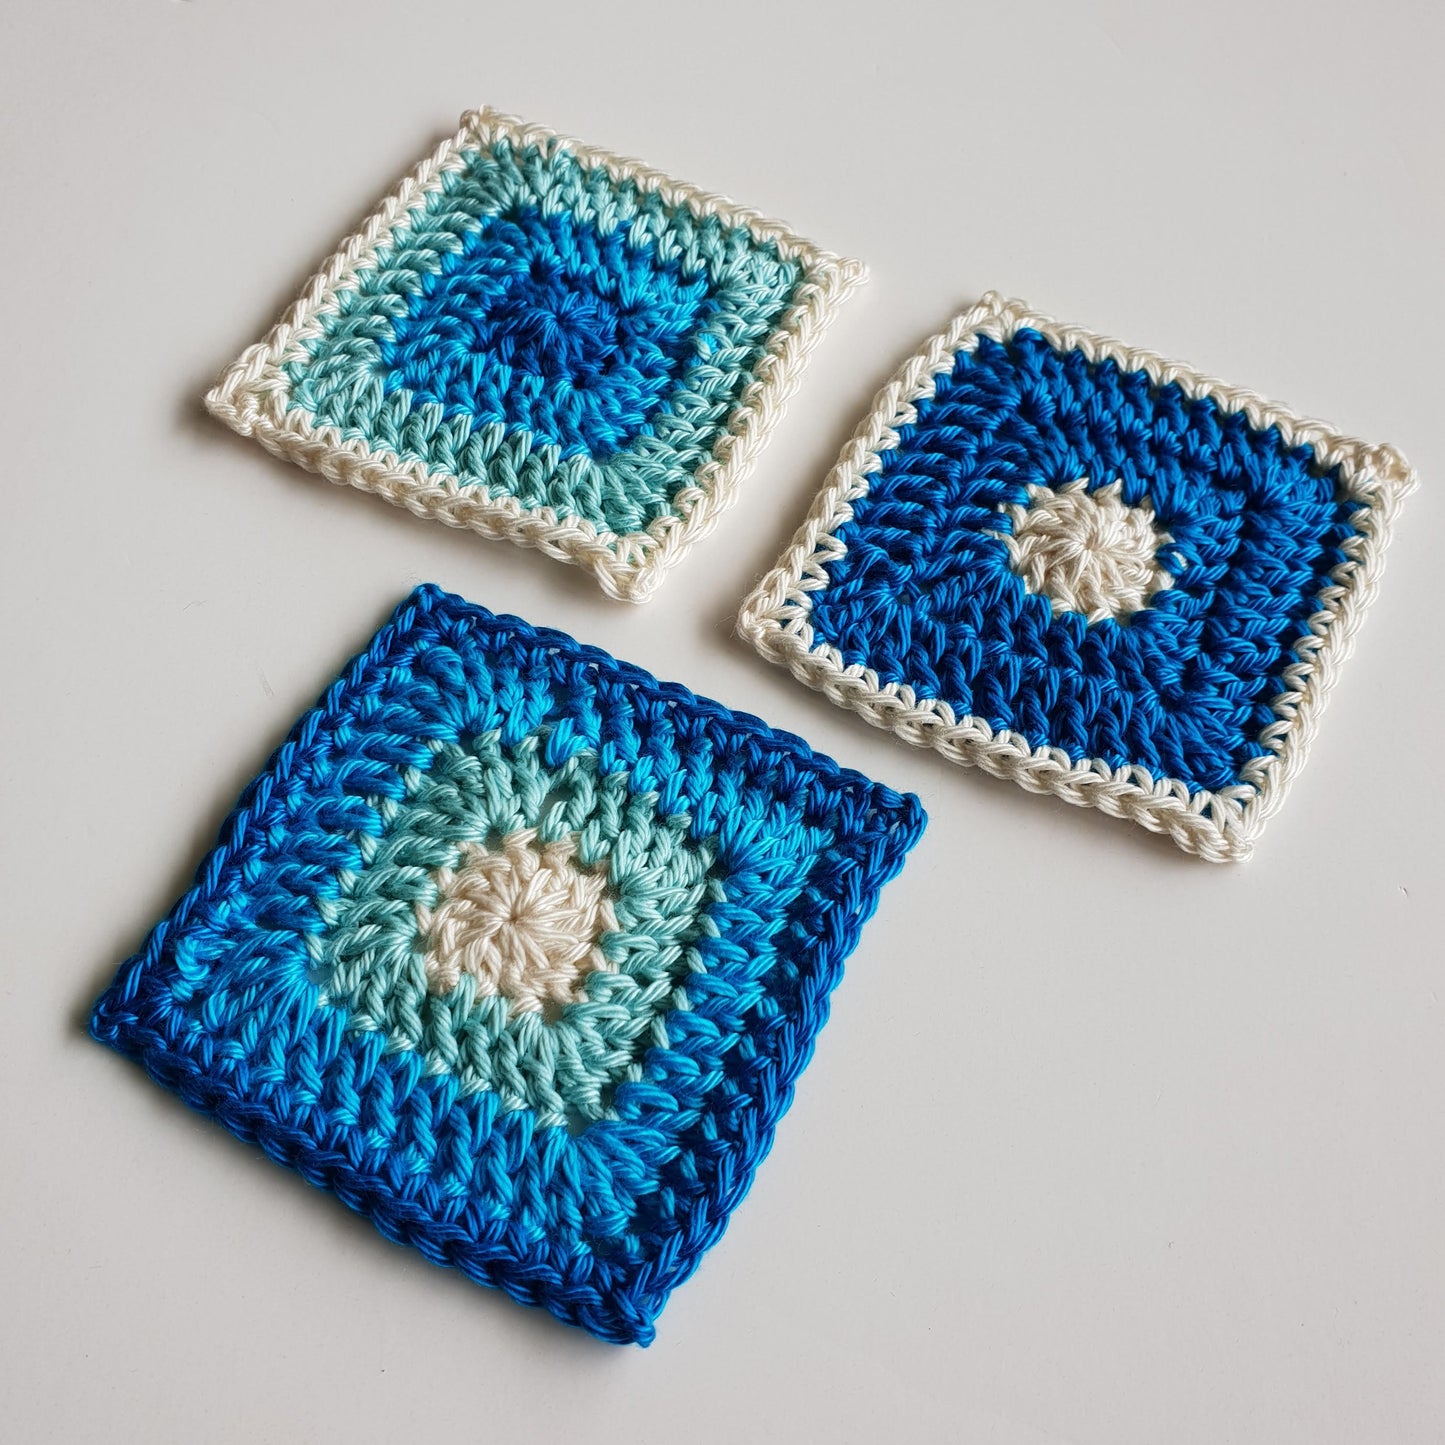 Three Scraptastic Square Pattern granny squares by Shelley Husband